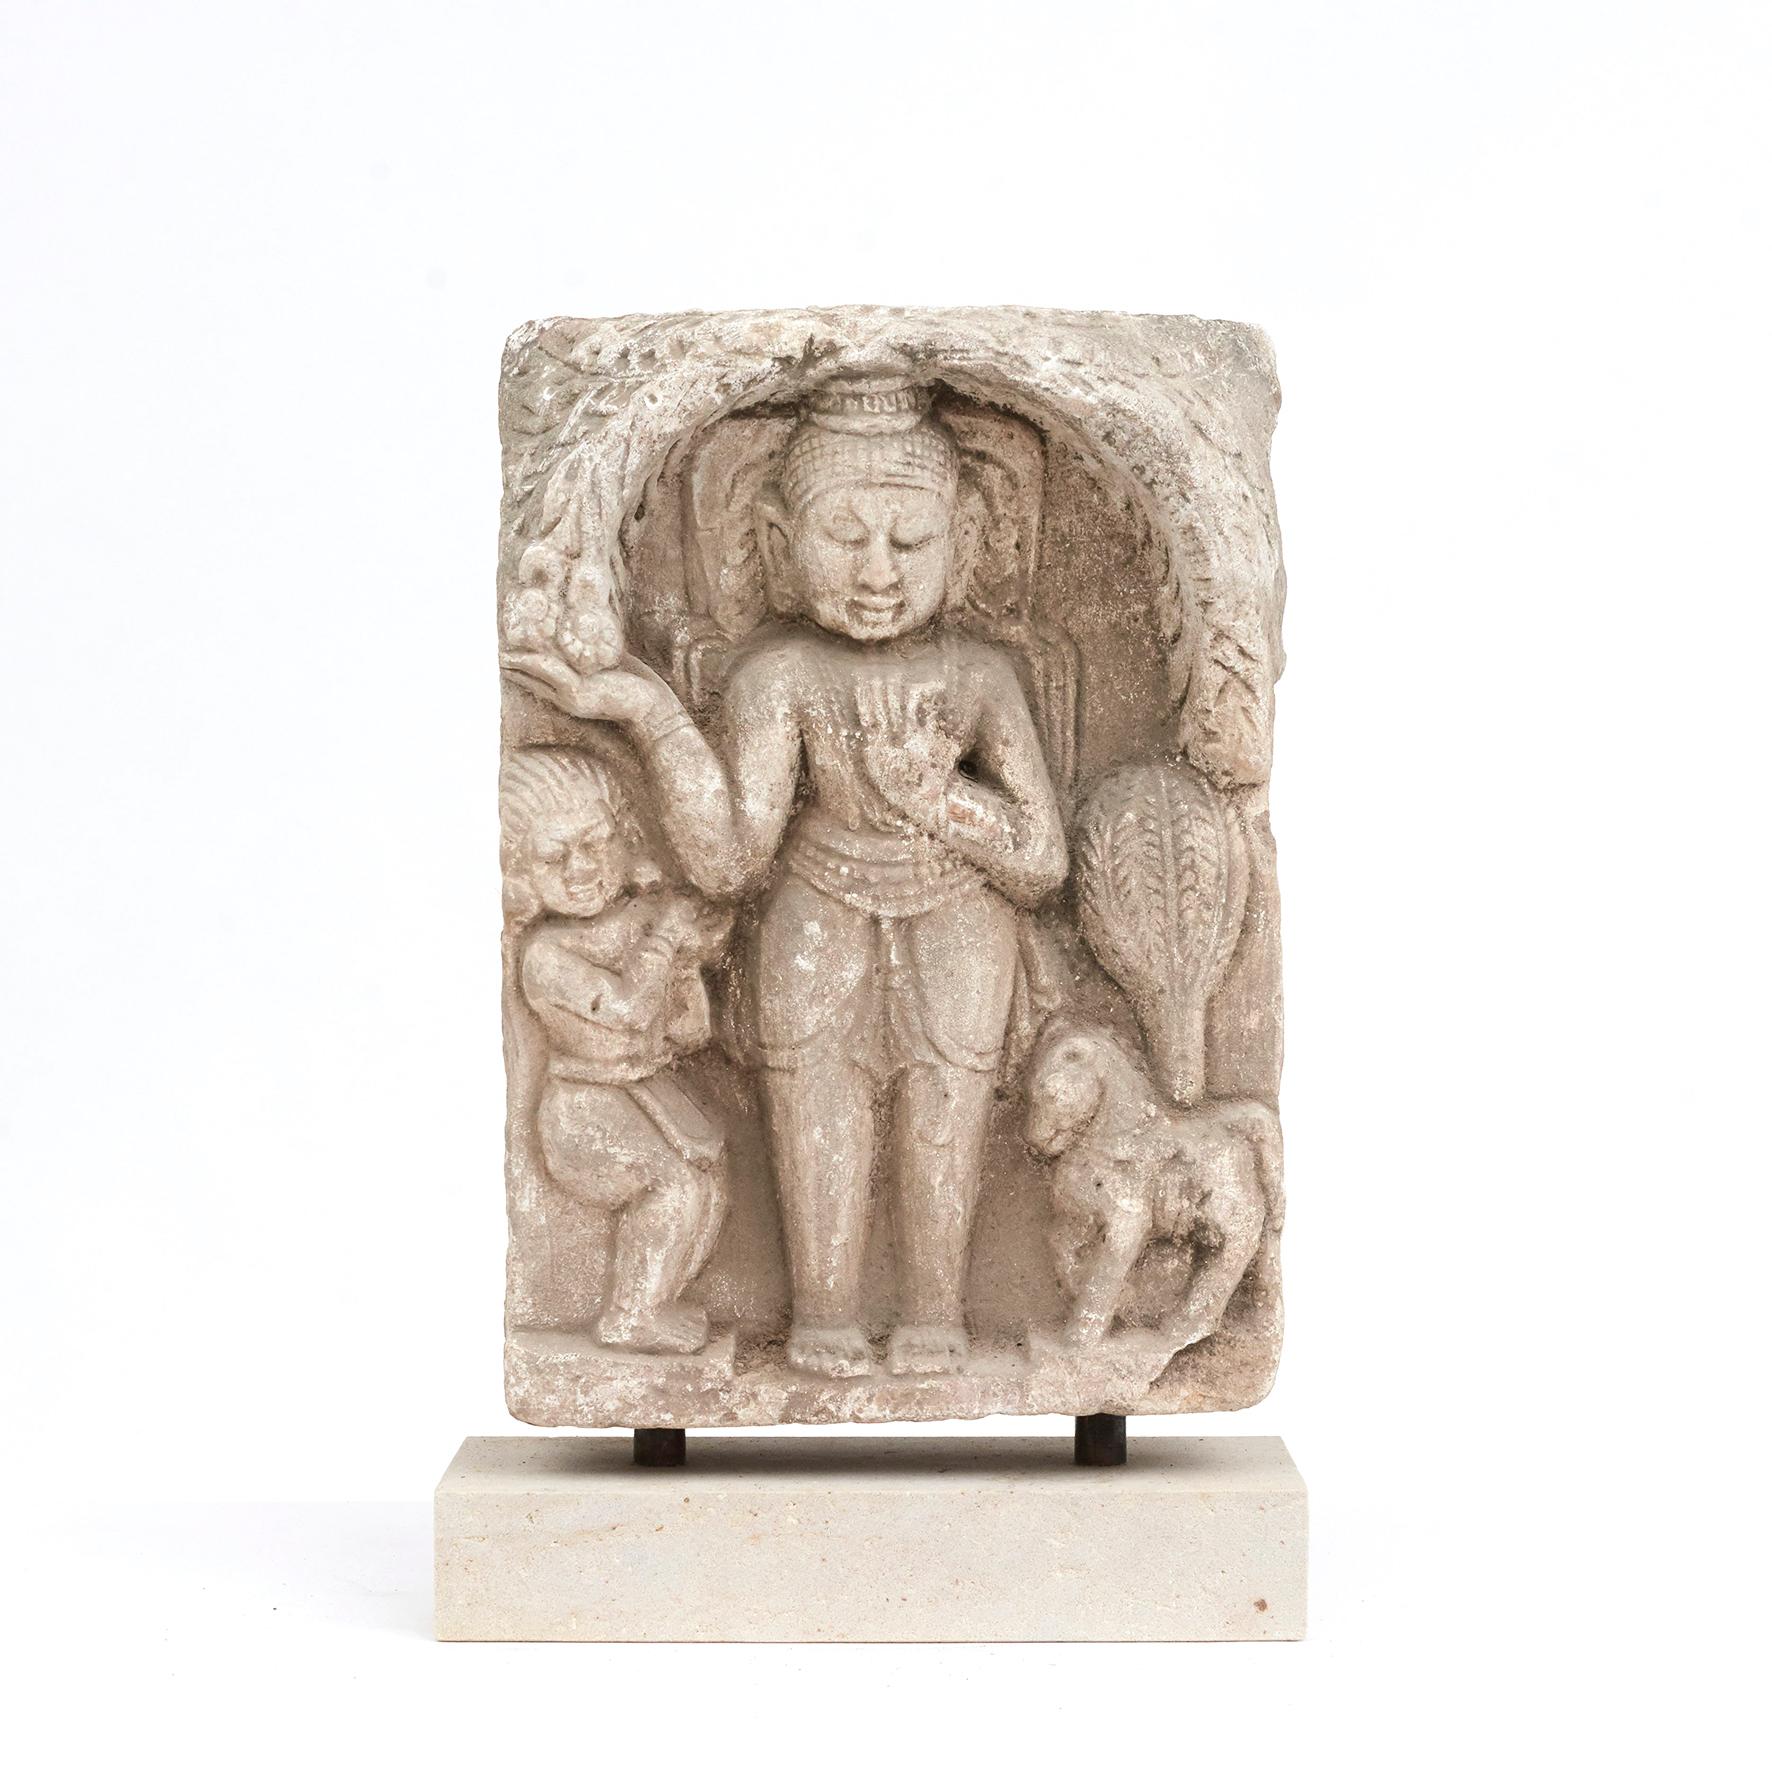 Hand-Crafted 15-16th Century Sandstone Standing Buddha Sculpture For Sale